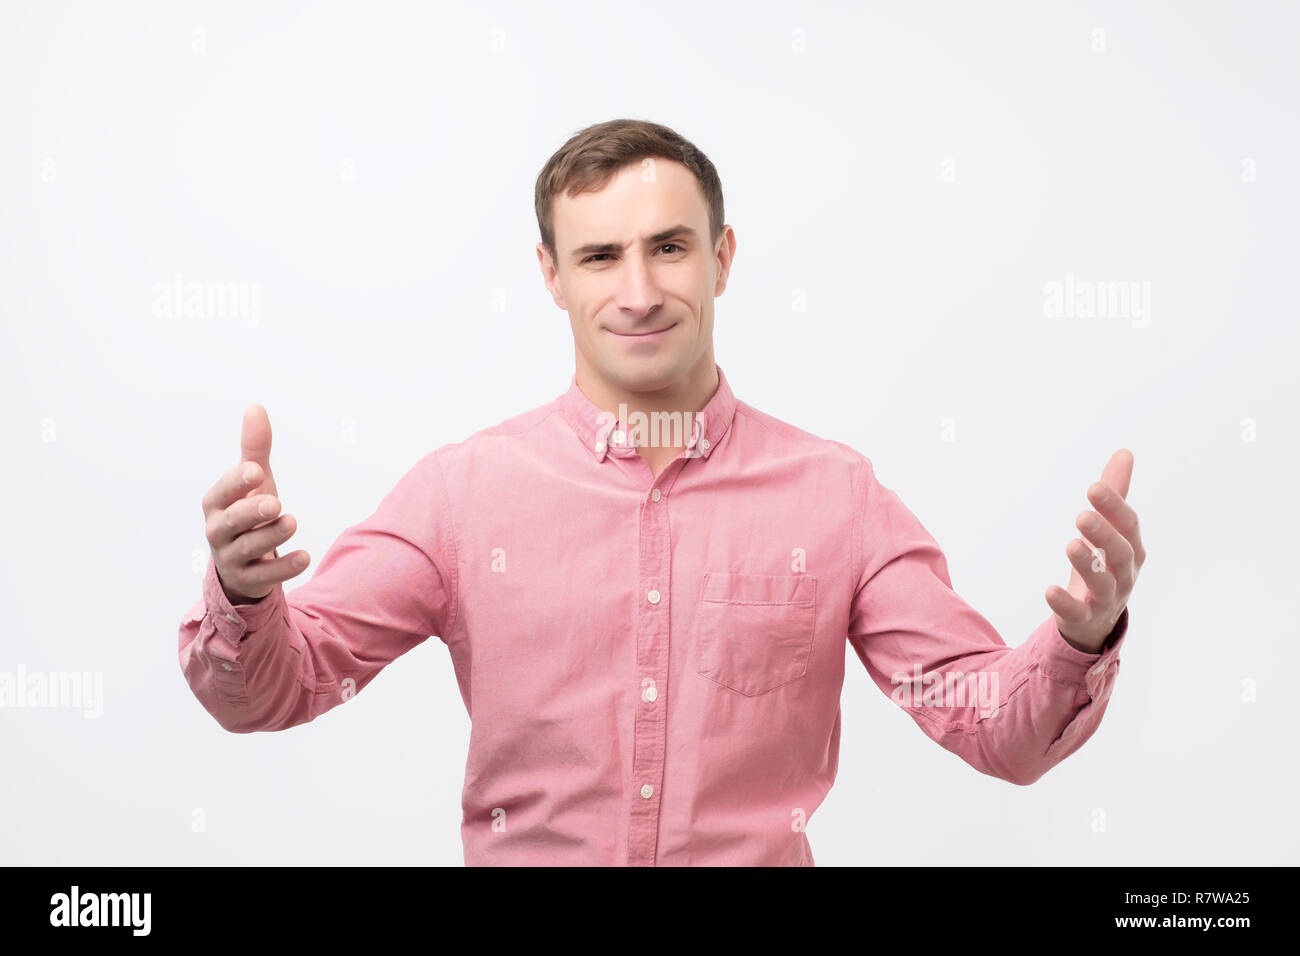 Argue, arguing concept. Young emotional surprised man looking at camera. Stock Photo